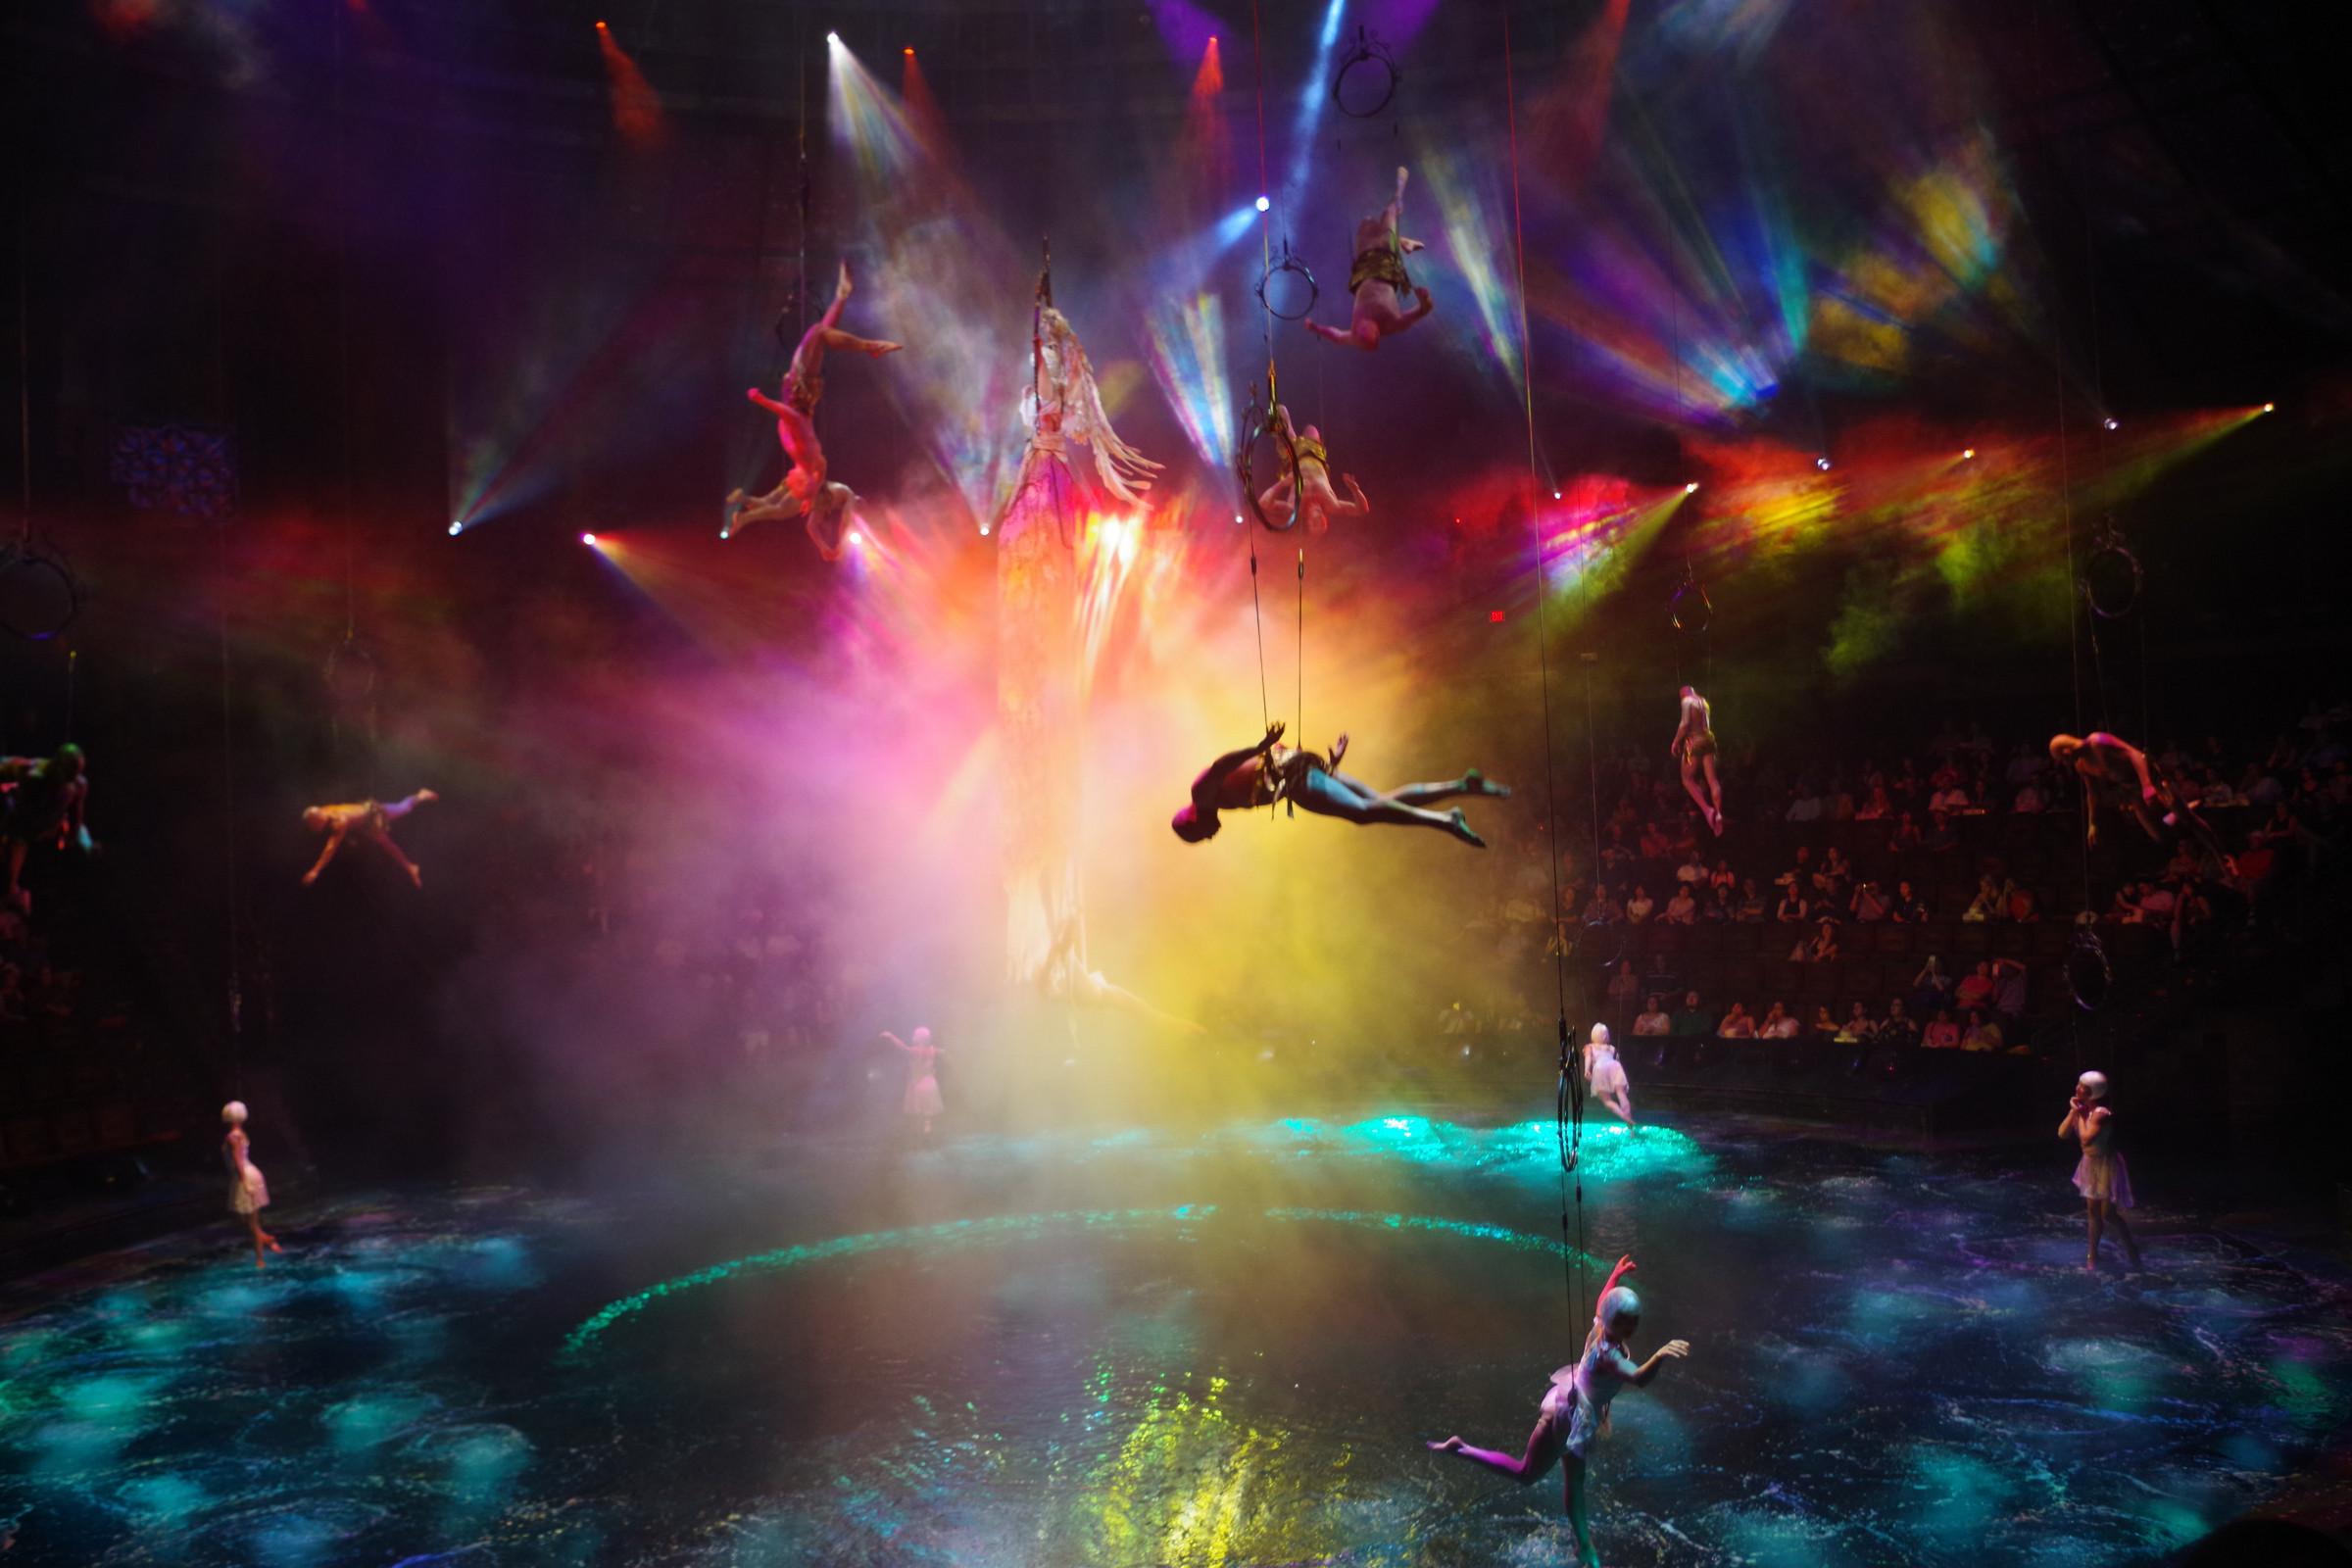 Le Reve, for me by far the best show in Las Vegas...and I've seen